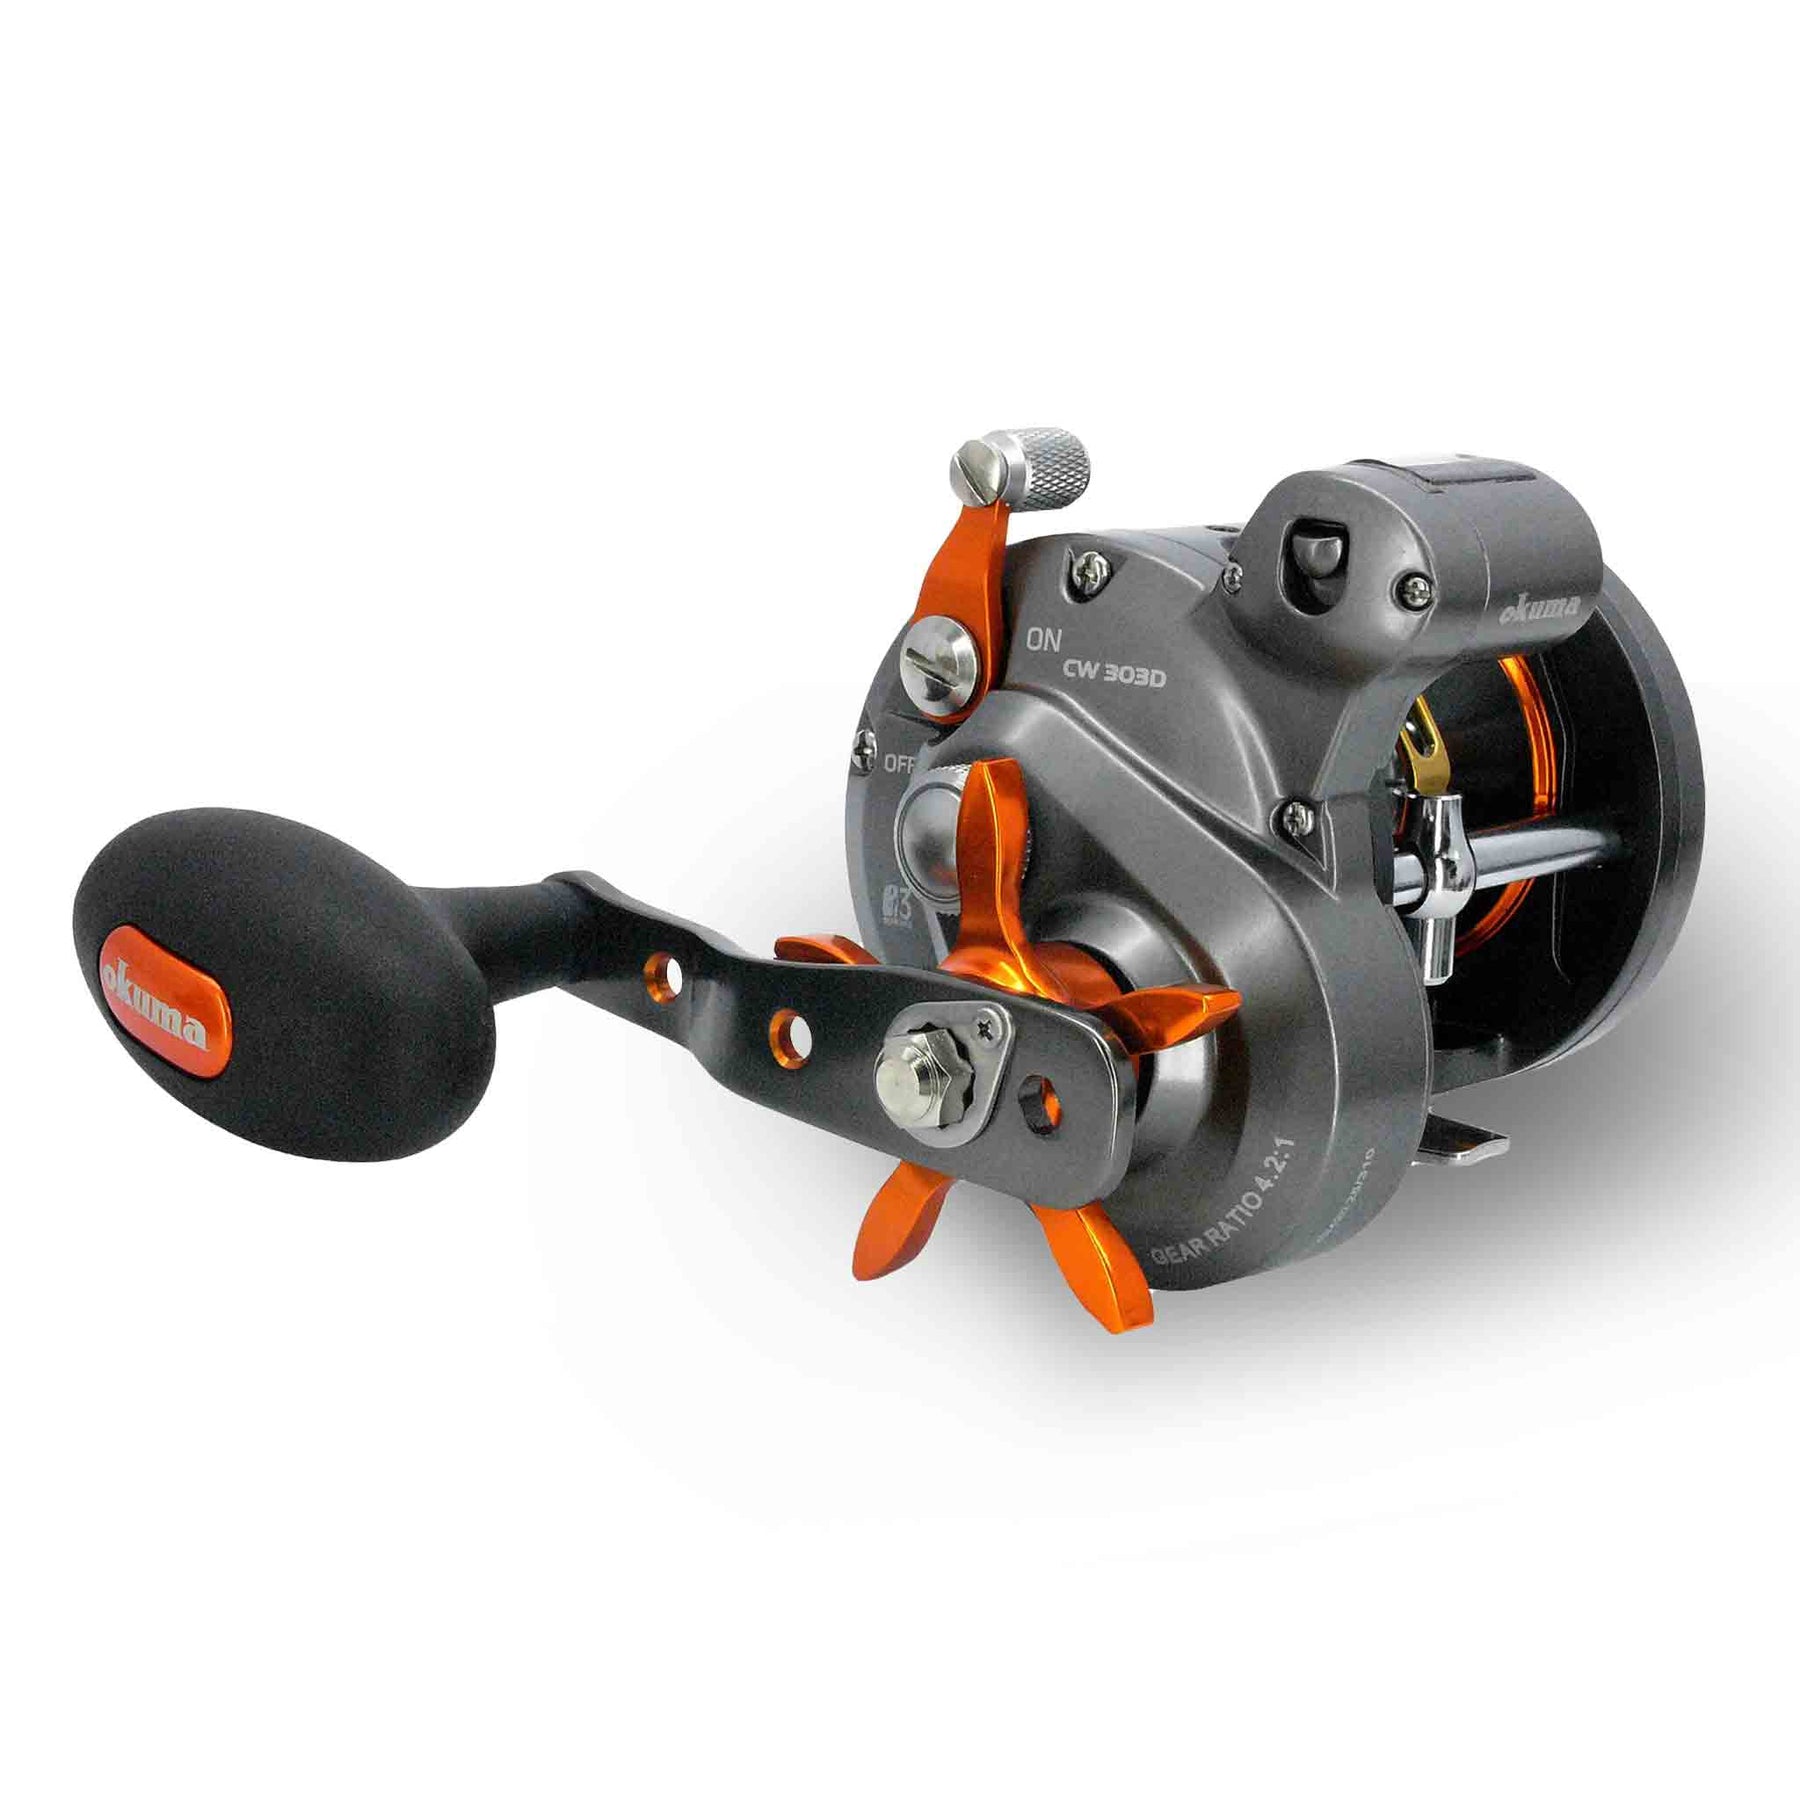 New & used spinning reels for predator fishing, only at CV Fishing